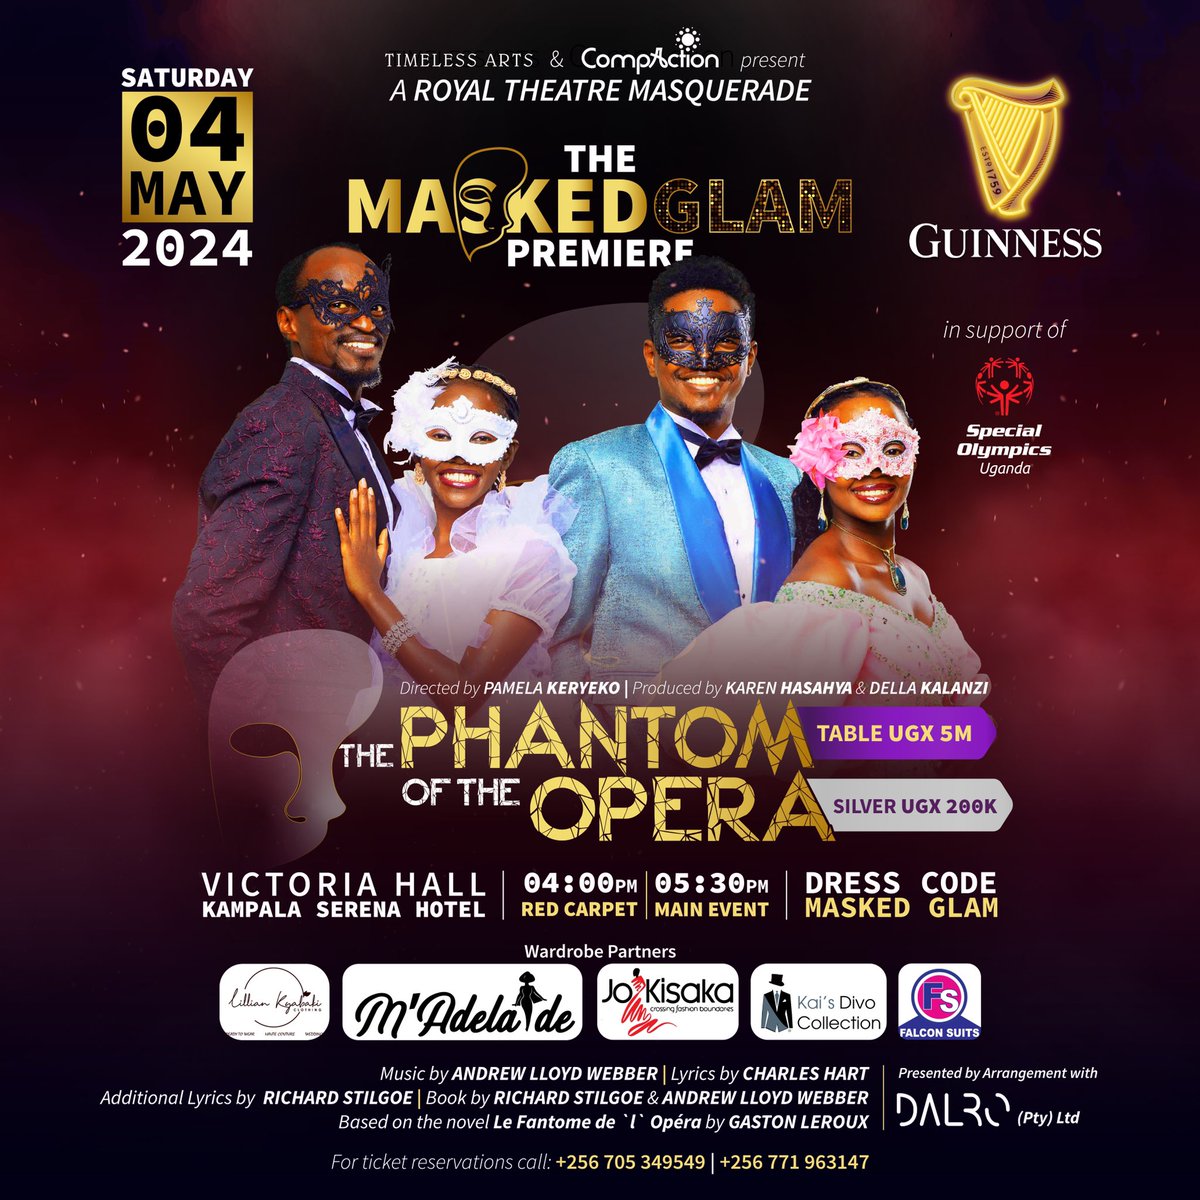 Ready or not, tomorrow’s the day! What’s your fashion statement? Let’s give a shoutout to our amazing wardrobe sponsors! 

Lillian Kyabaki Clothing 
M’Adelaide
Jo Kisaka
Kais Divo Collection 
Falcon Suits

#PhantomOfTheOpera
#POTOWorldwide
#TimelessArts
#CompAction